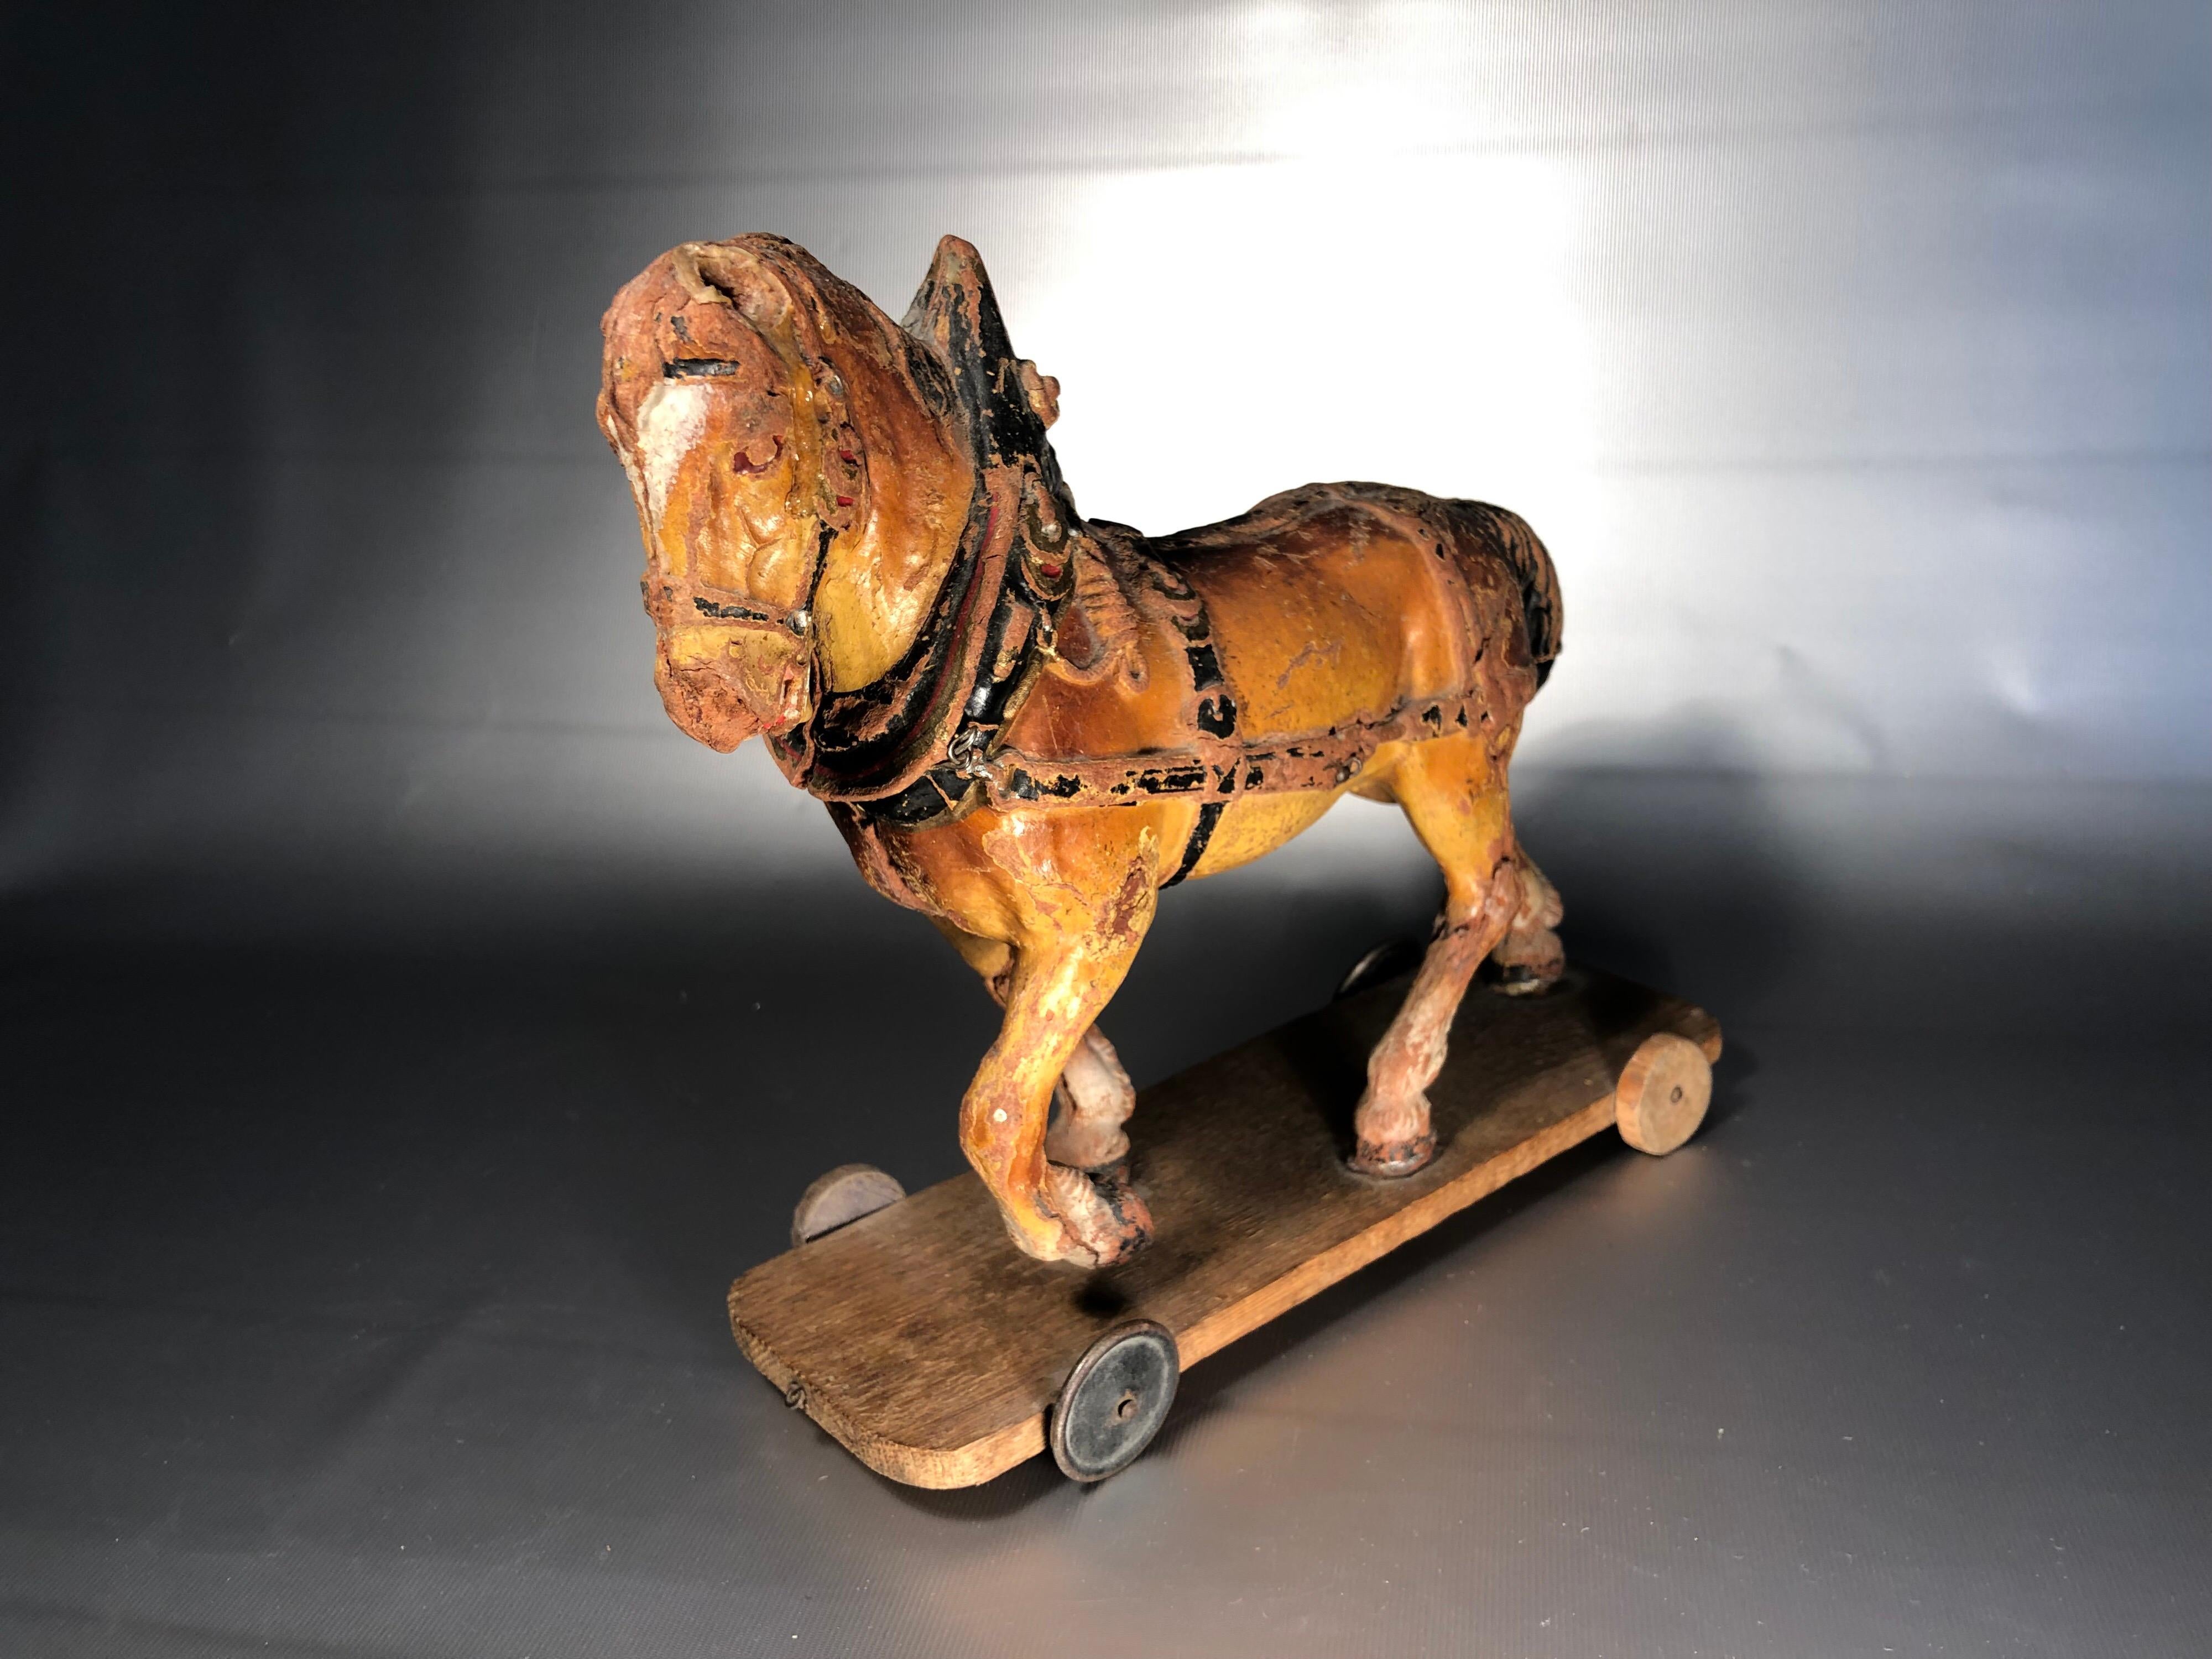 Arts and Crafts Antique Wooden Toy Horse, 19th Century ON SALE 